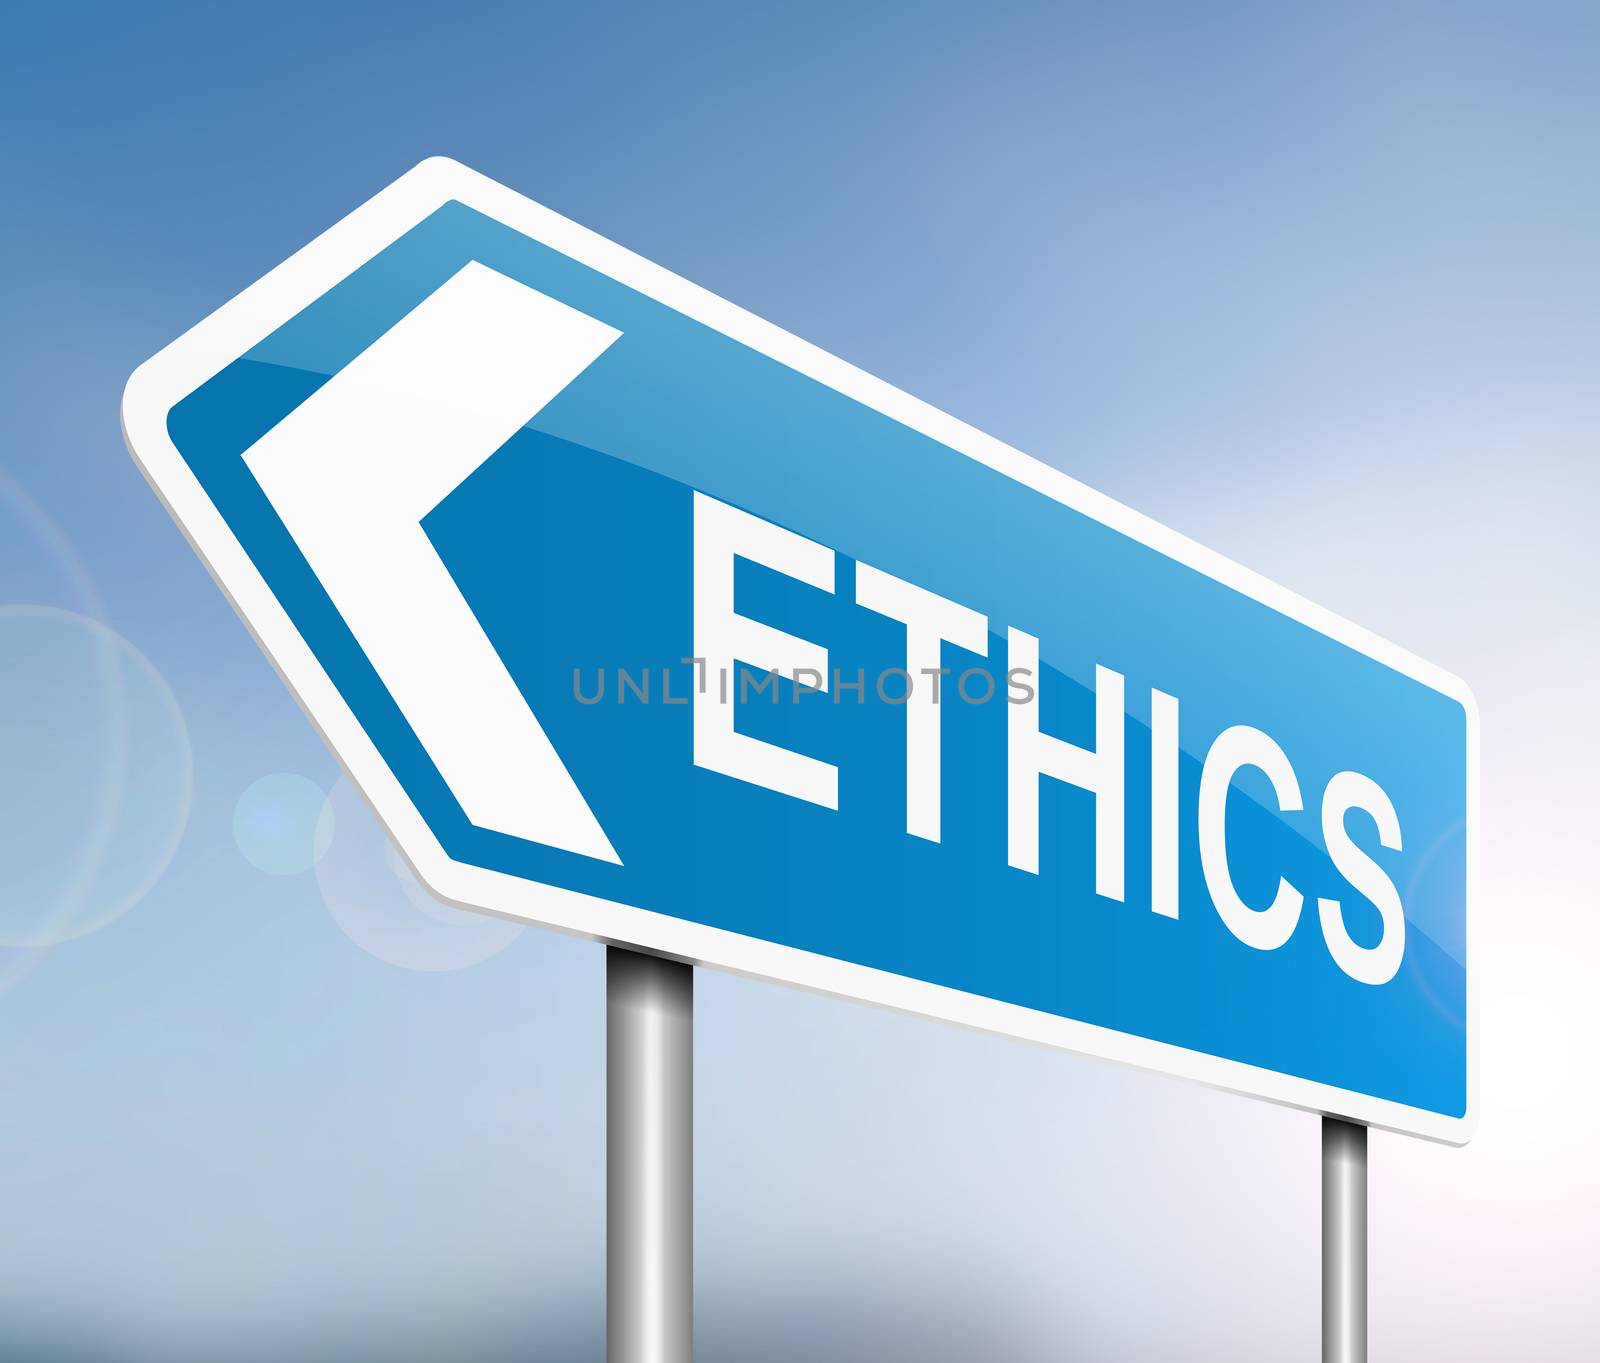 Illustration depicting a sign with an ethics concept.